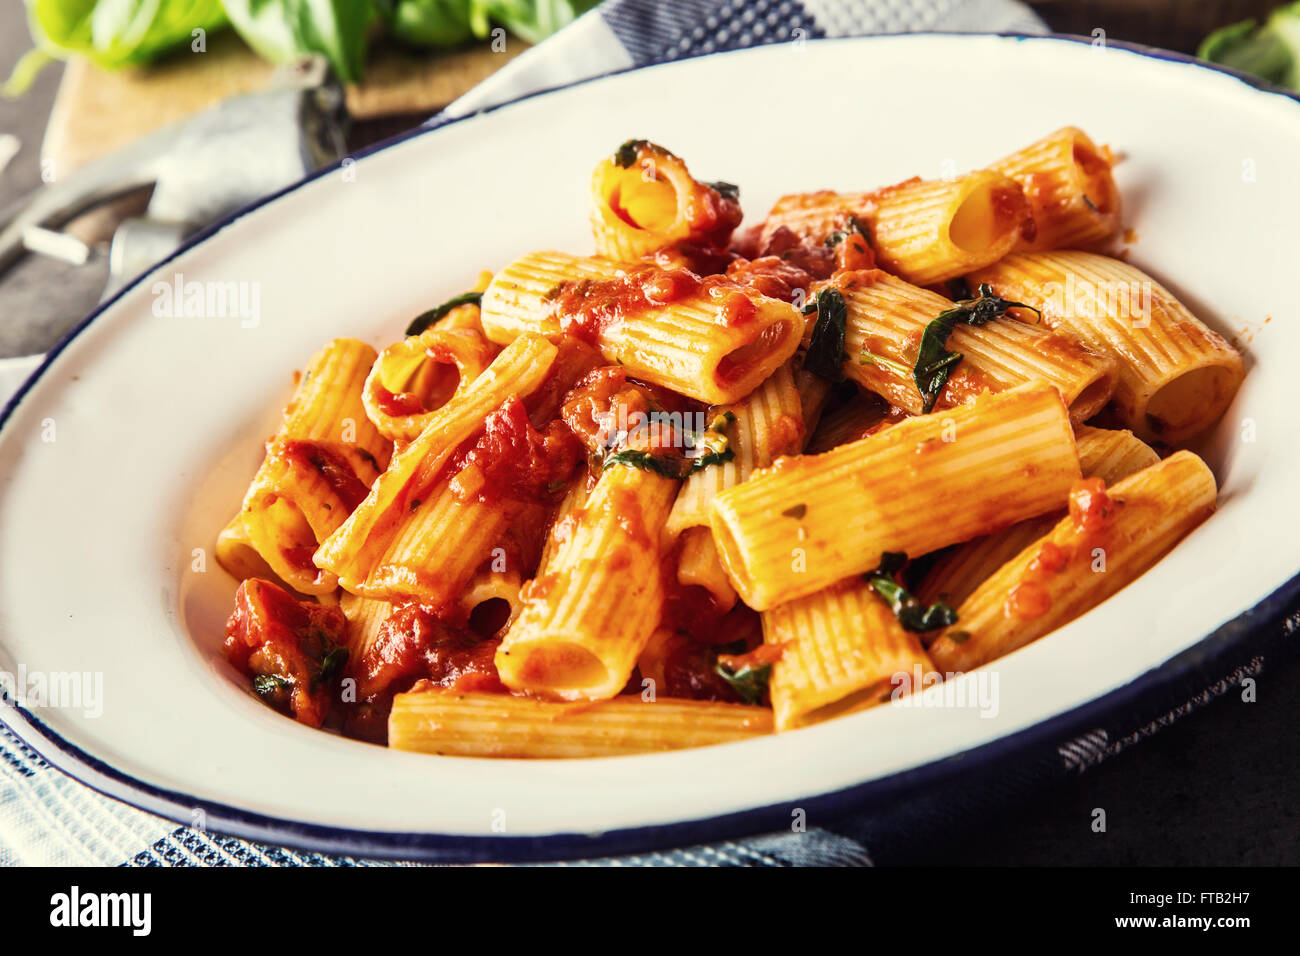 Pasta. Italian and Mediterranean cuisine. Pasta Rigatoni with tomato sauce basil leaves garlic and parmesan cheese. An old home Stock Photo